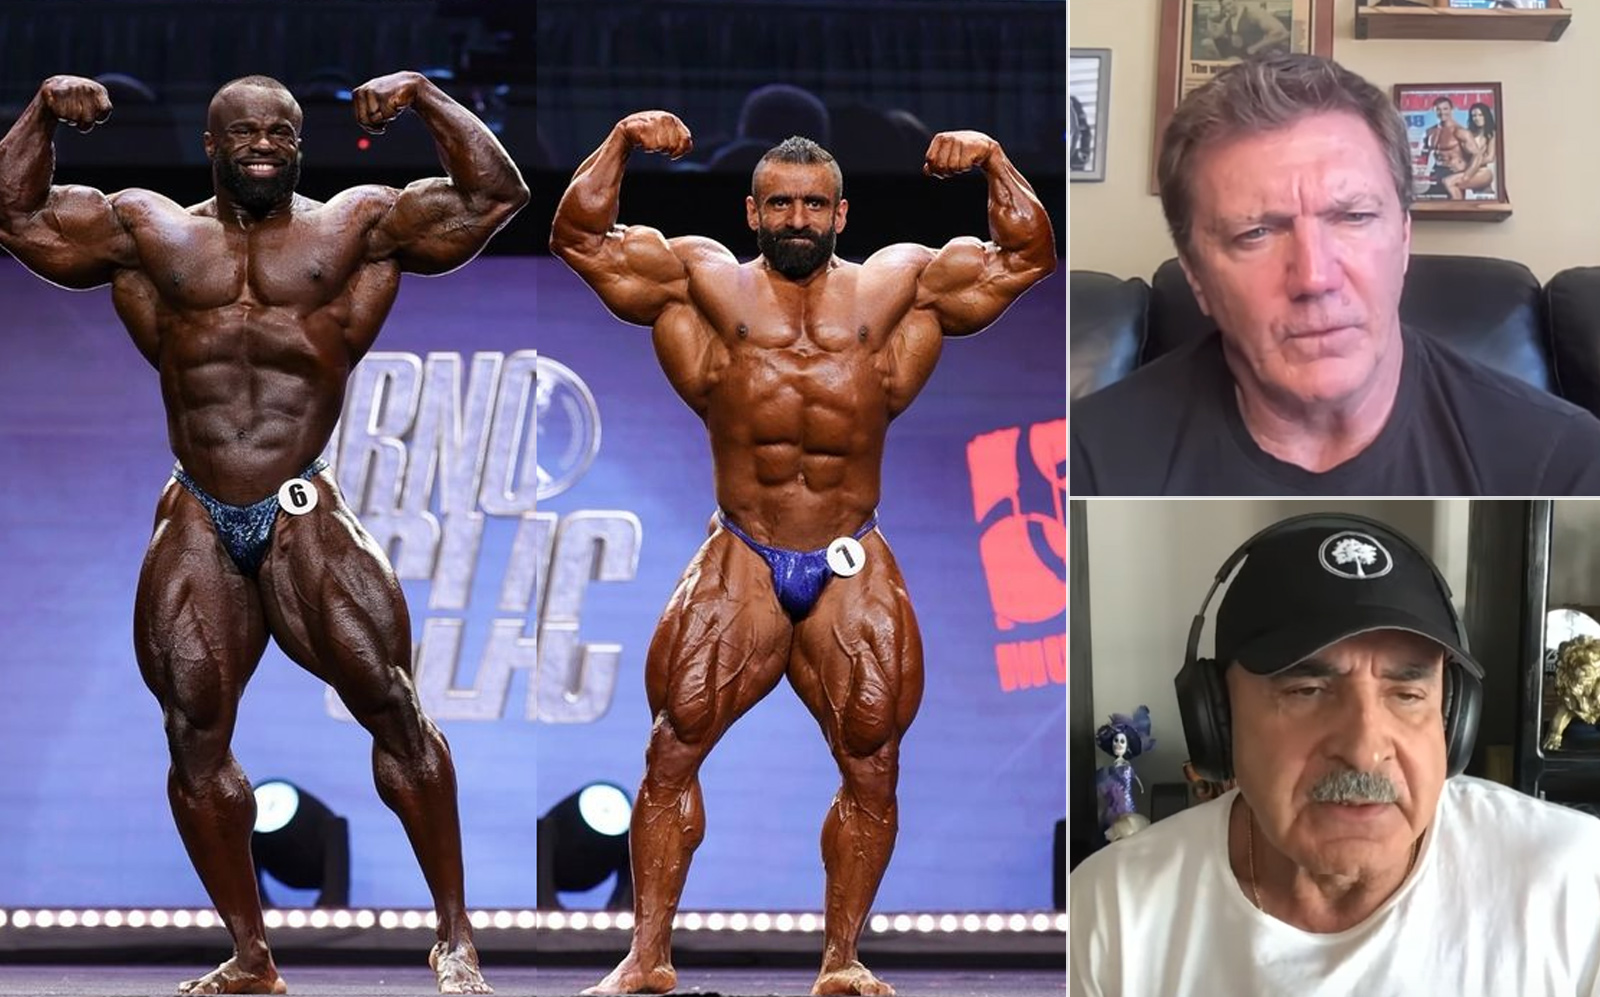 Arnold Sports Festival presented by KSM-66